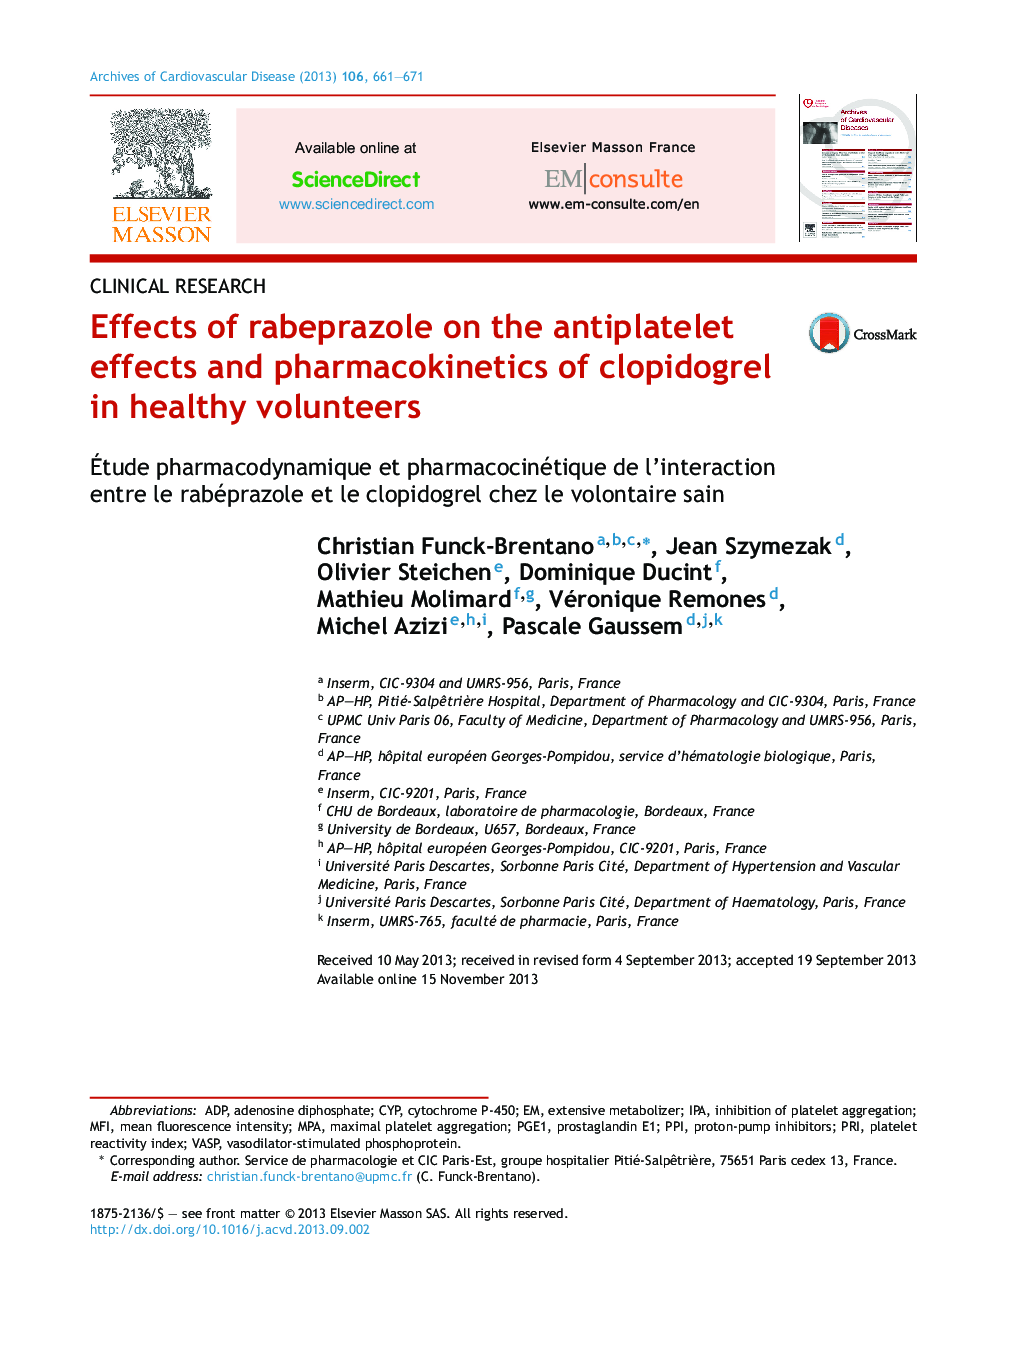 Effects of rabeprazole on the antiplatelet effects and pharmacokinetics of clopidogrel in healthy volunteers